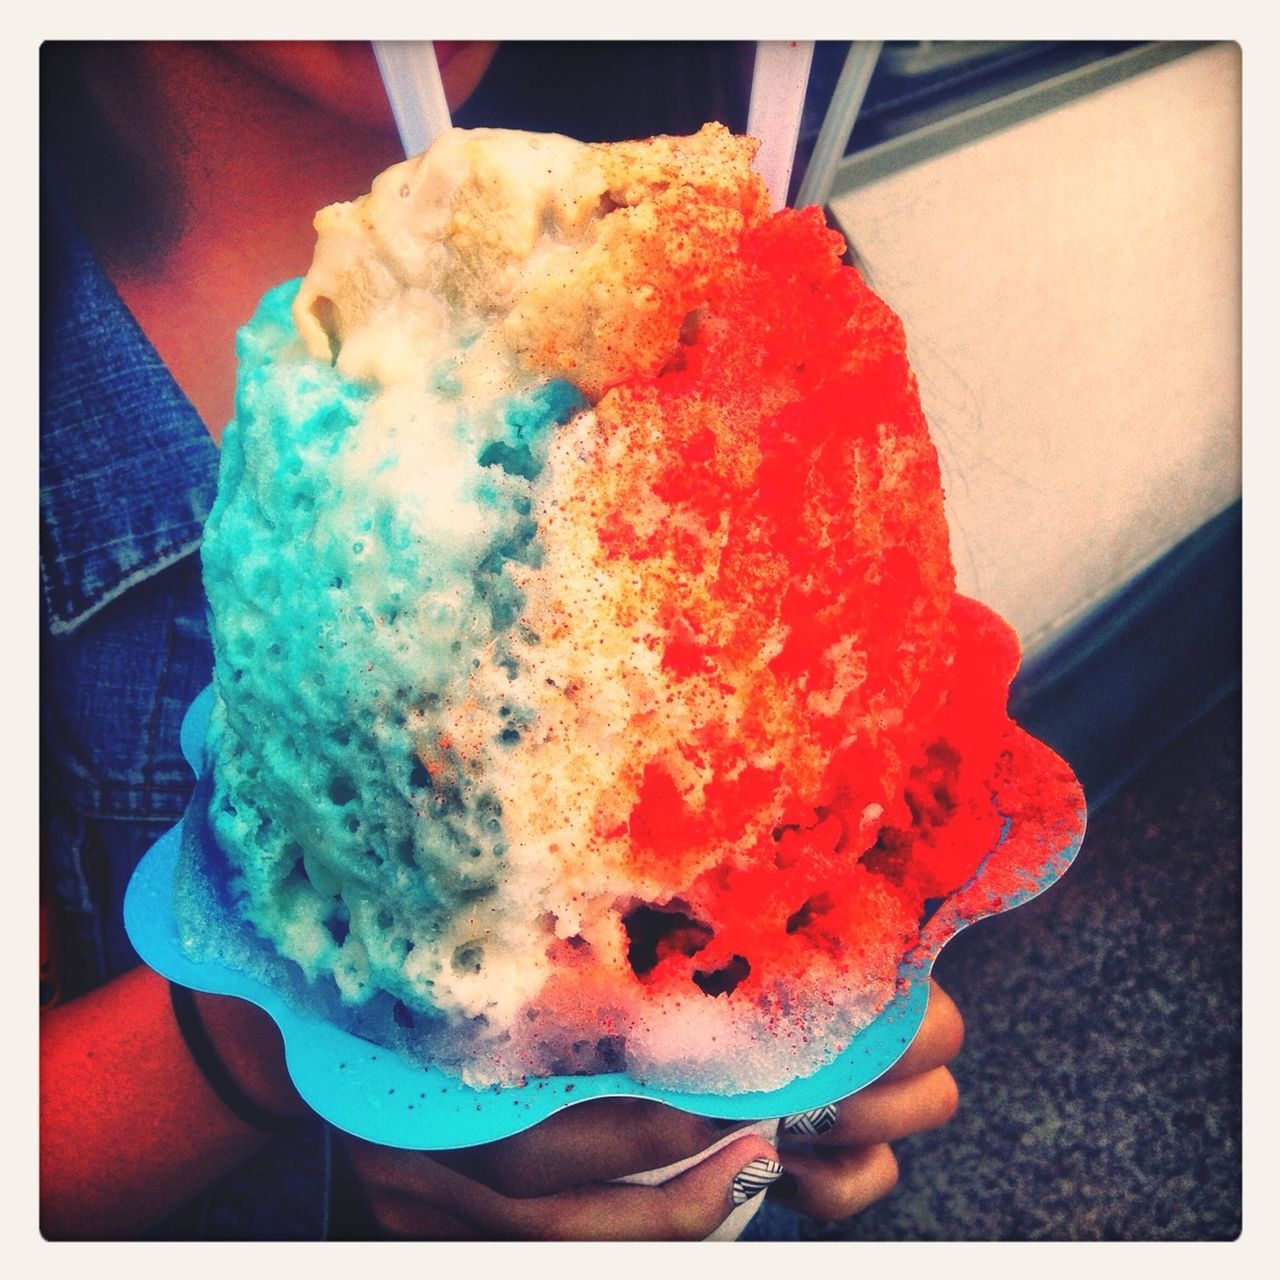 Craving this ATM! 